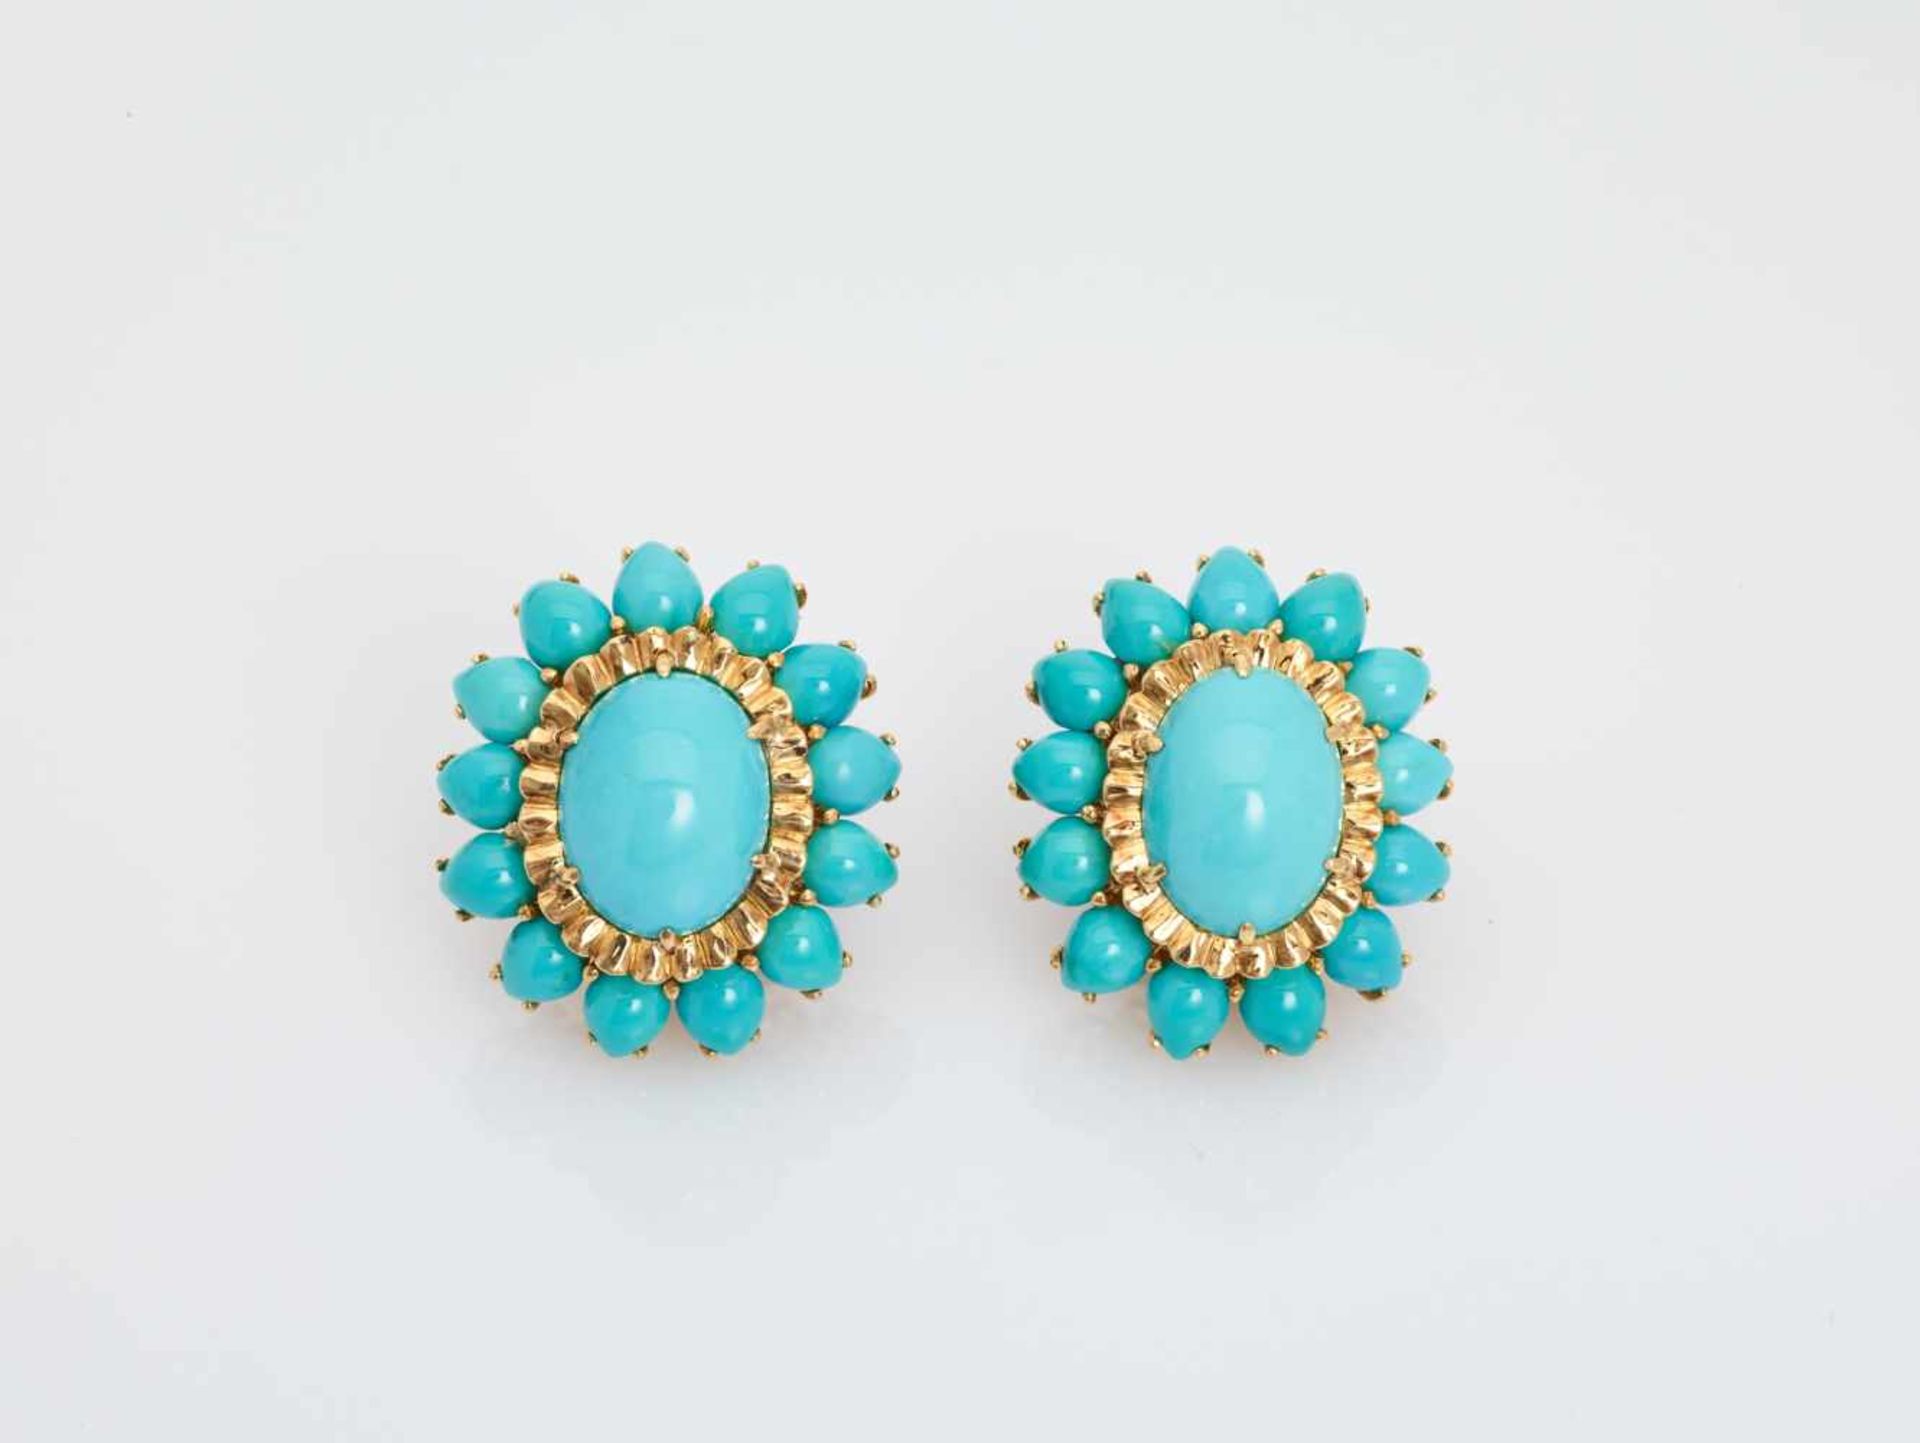 A DAVID WEBB PAIR OF 18 CARAT GOLD, PLATINUM AND TURQUOISE ‘STAR’ EAR CLIPSNew York, USAca. 1960,